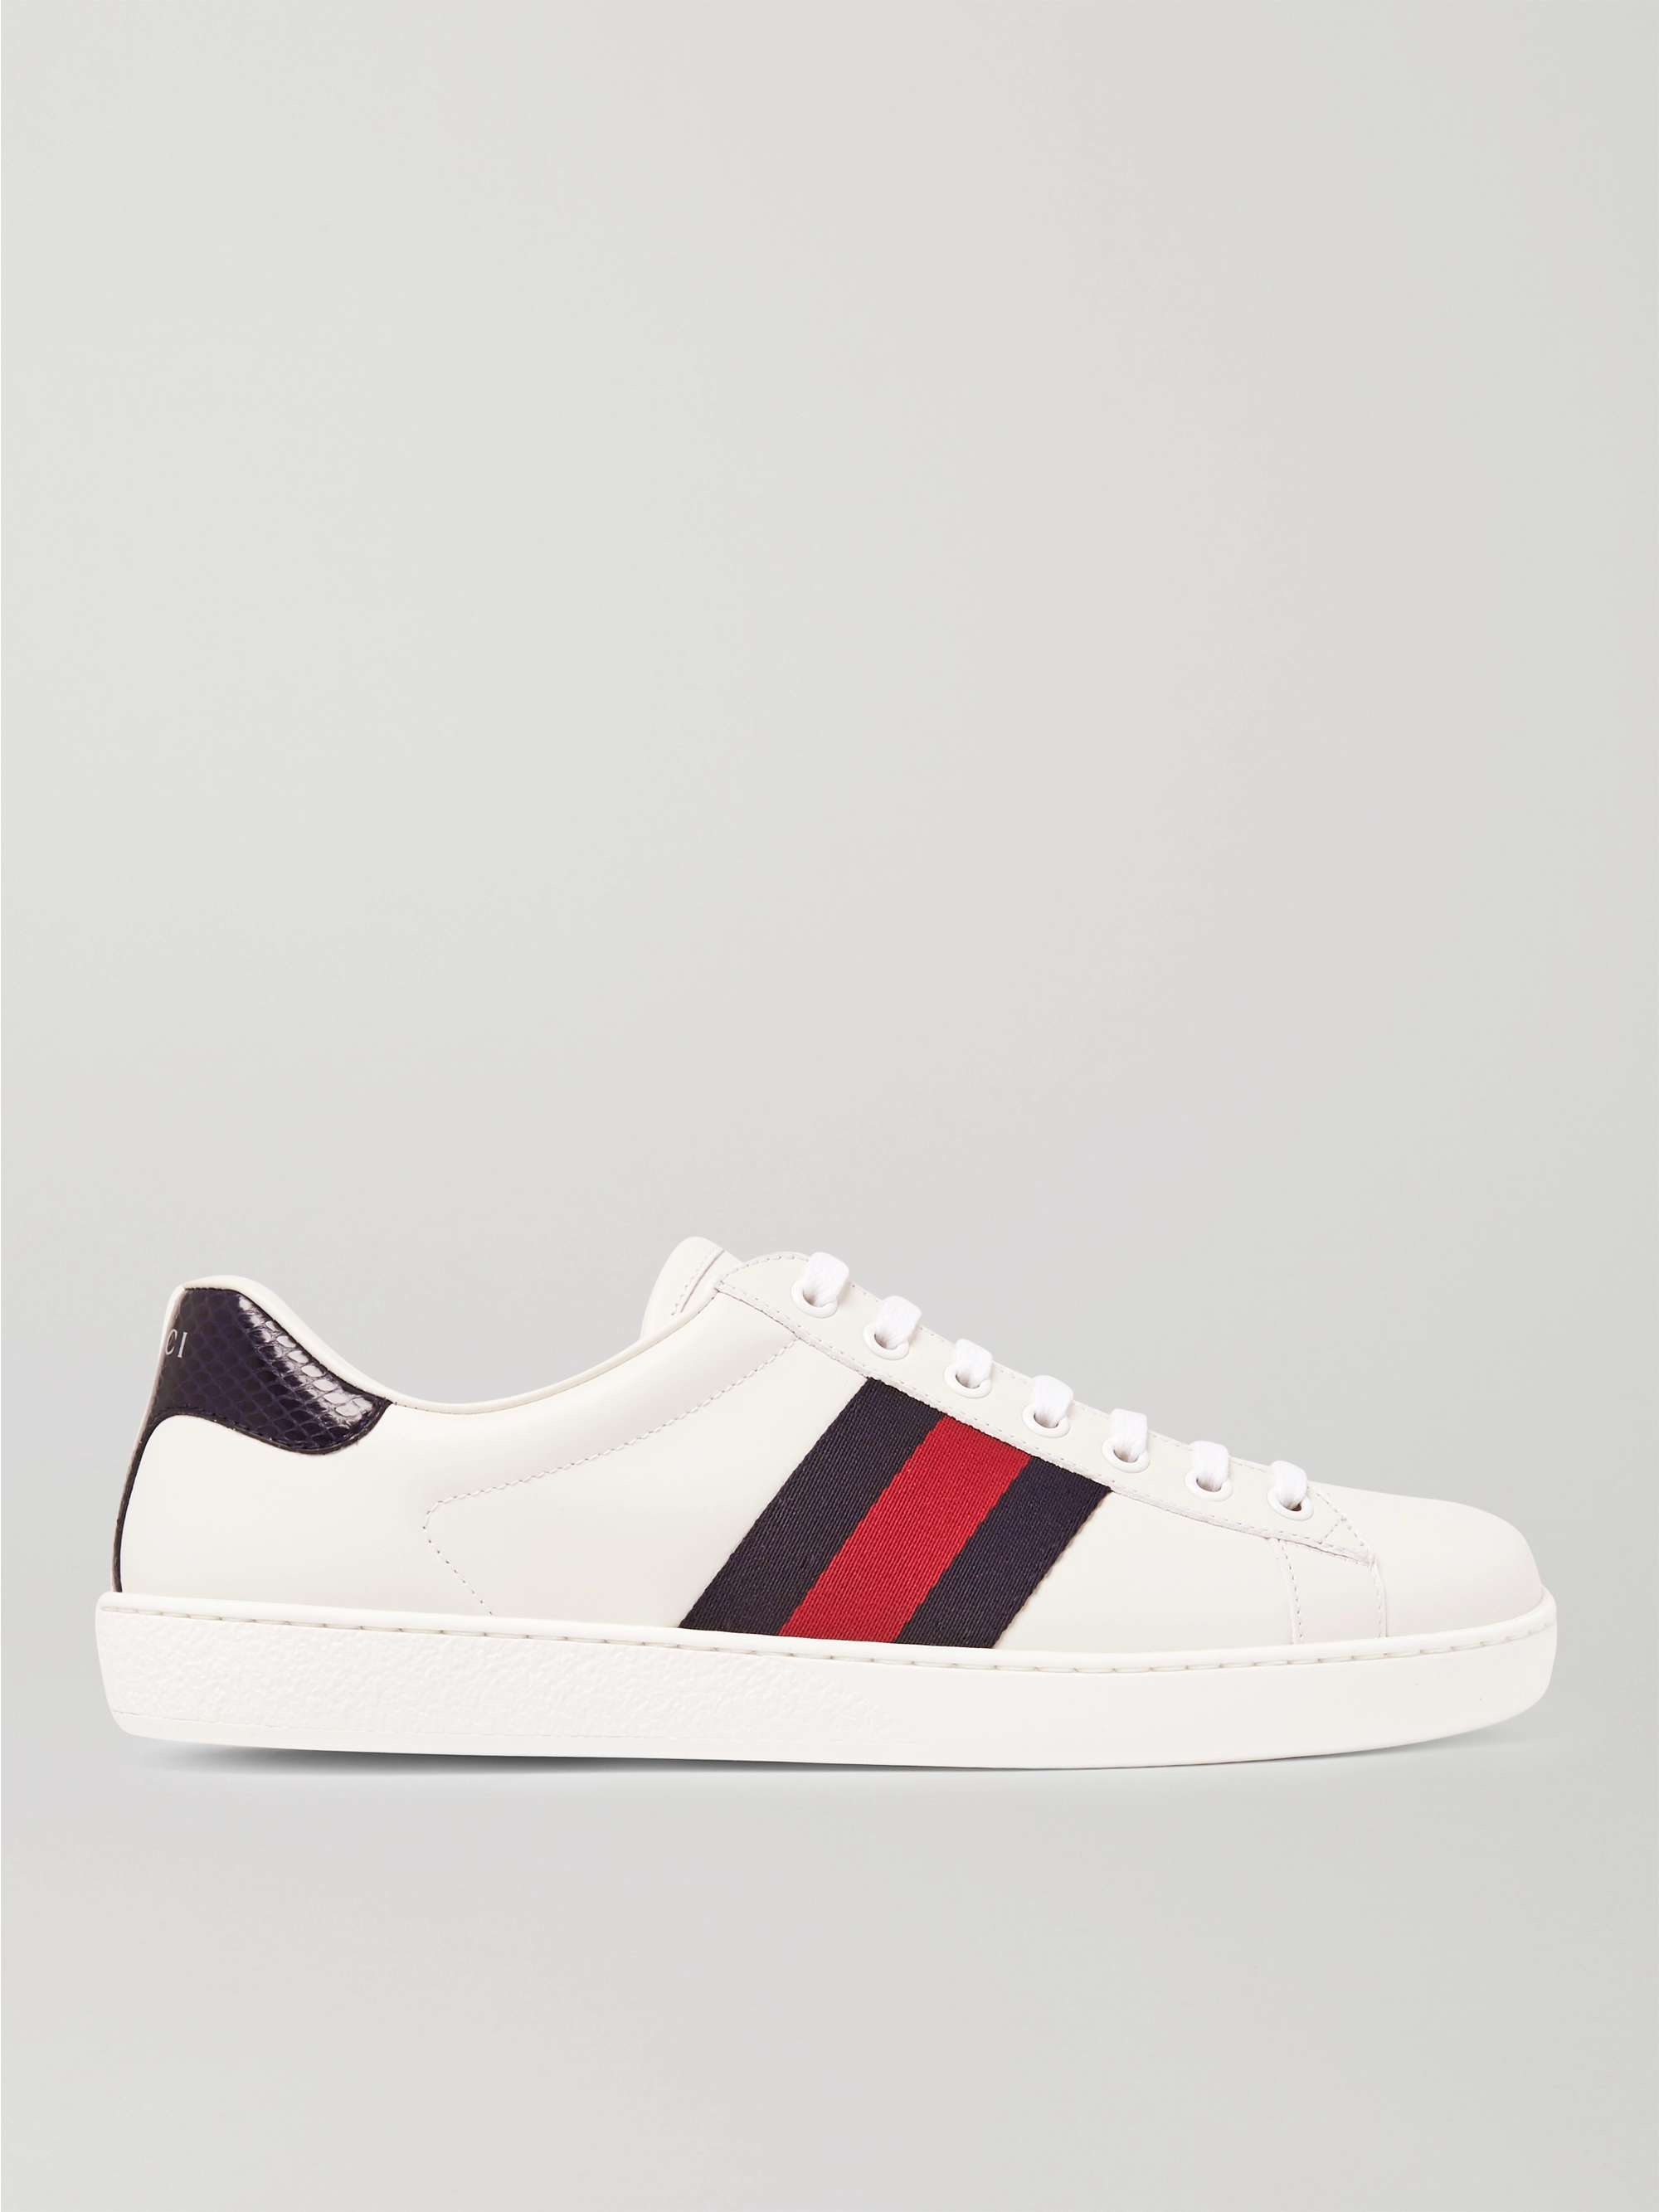 GUCCI Ace Faux Watersnake-Trimmed Leather Sneakers for Men | MR PORTER